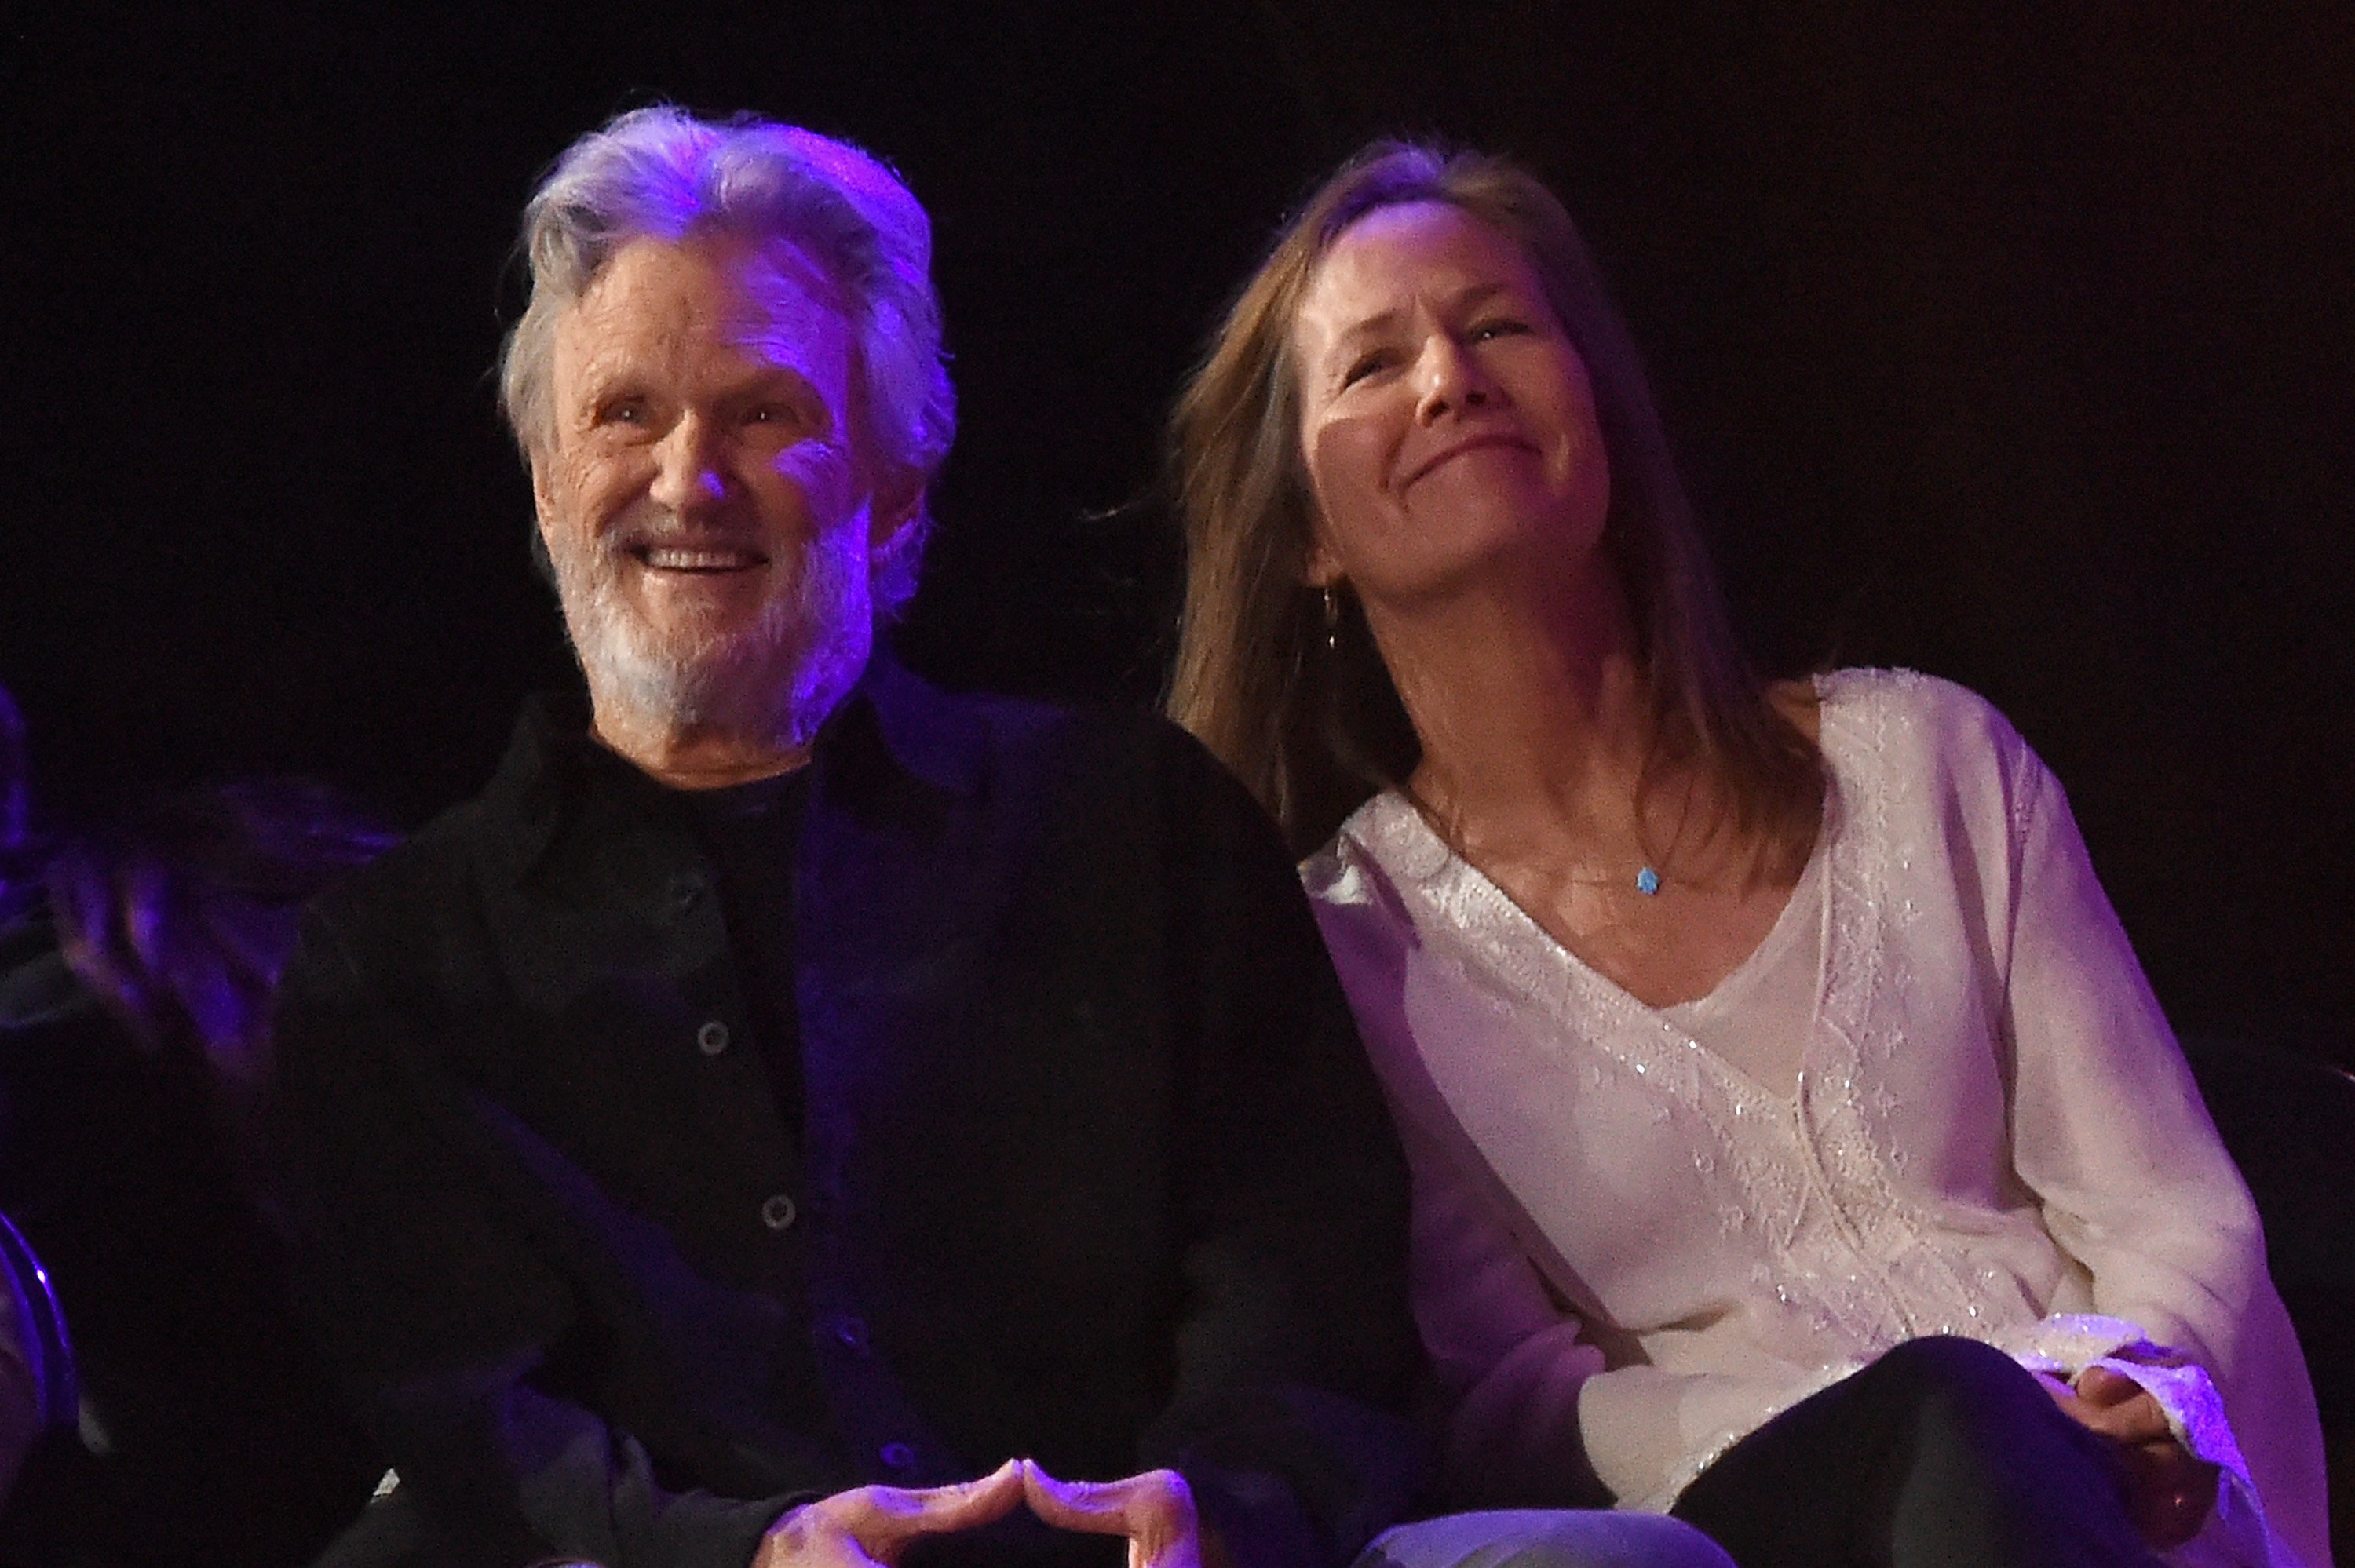 Kris Kristofferson and Lisa Meyers attend The Life & Songs of Kris Kristofferson at Bridgestone Arena in Nashville, Tennessee | Photo: Getty Images